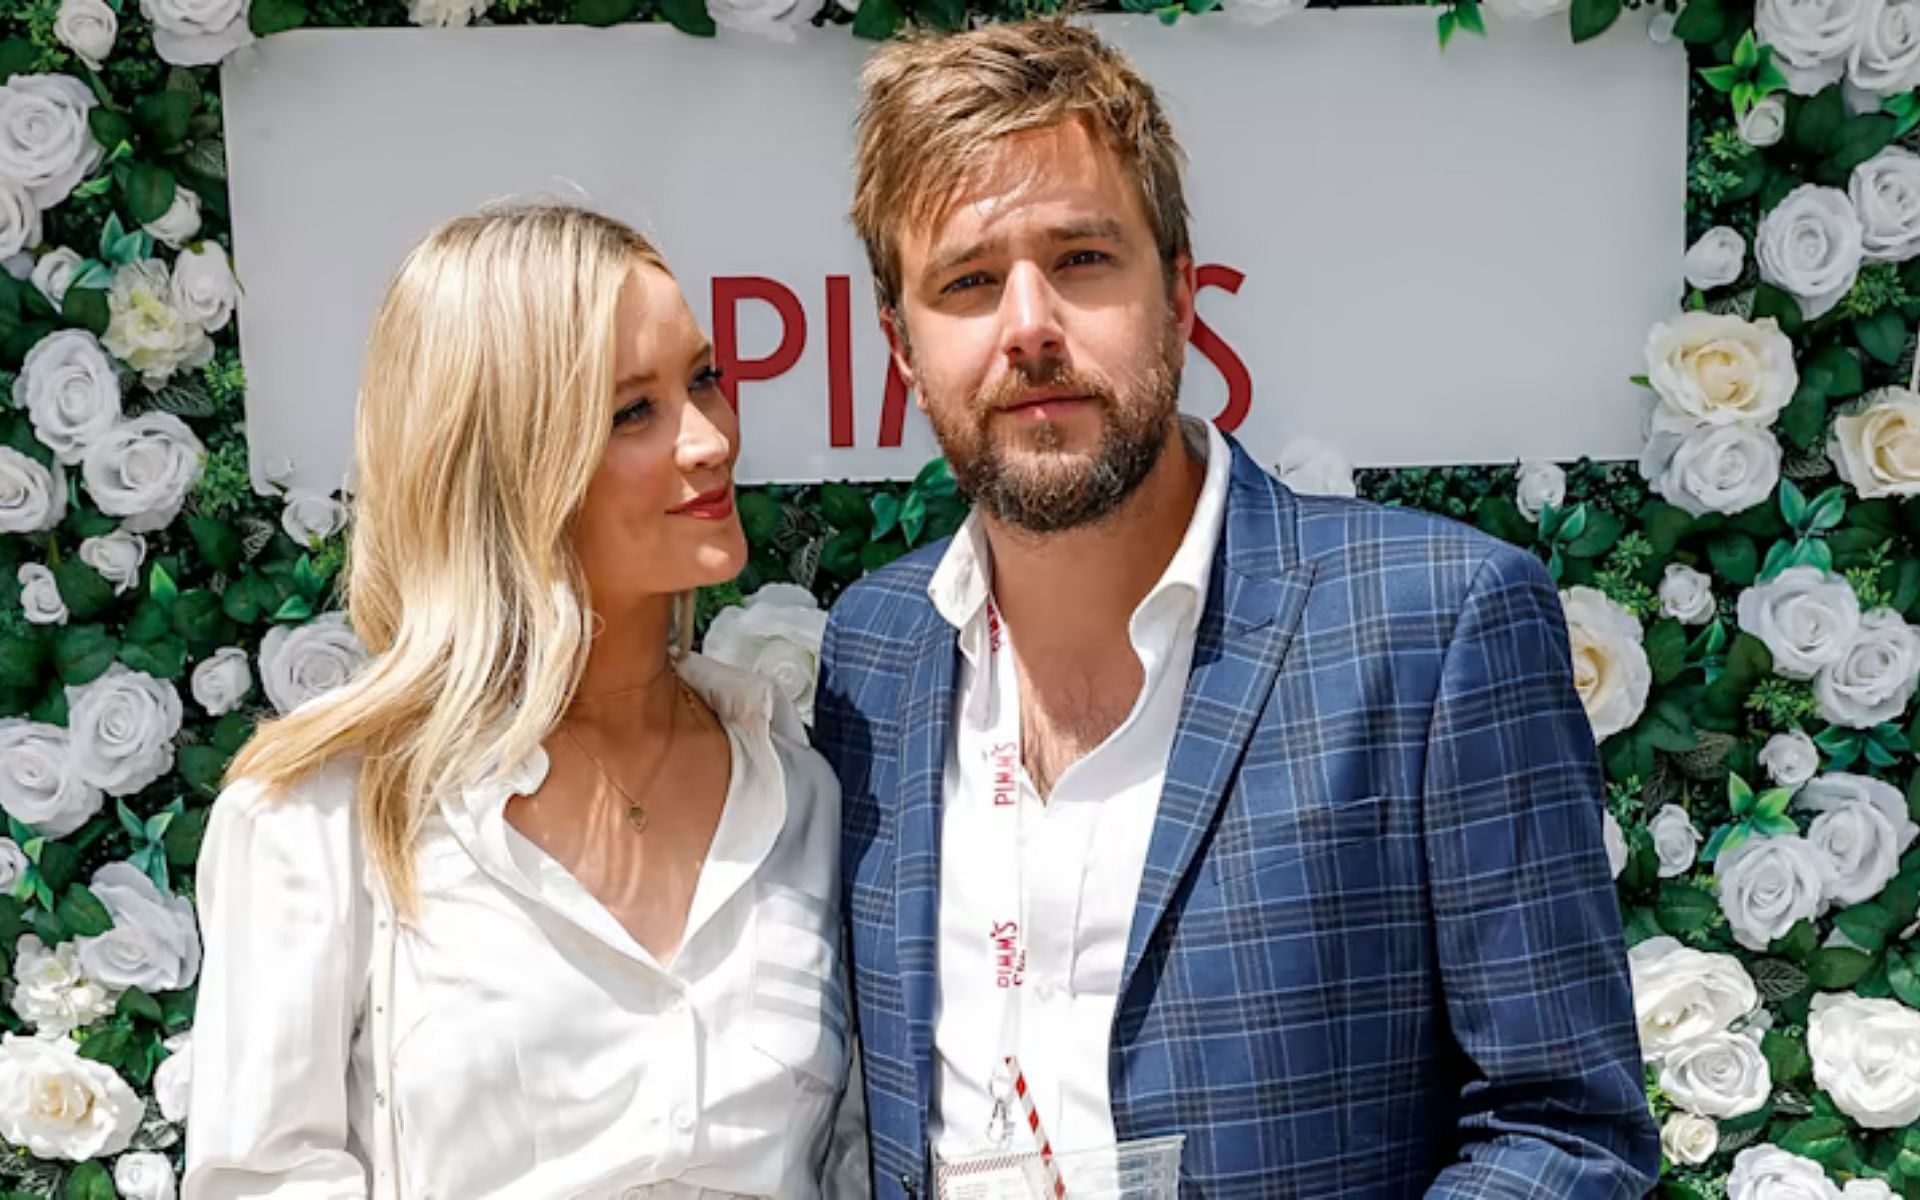 Laura Whitmore and Iain Stirling are the hosts of Love Island Season 8 (Image via Getty Images)